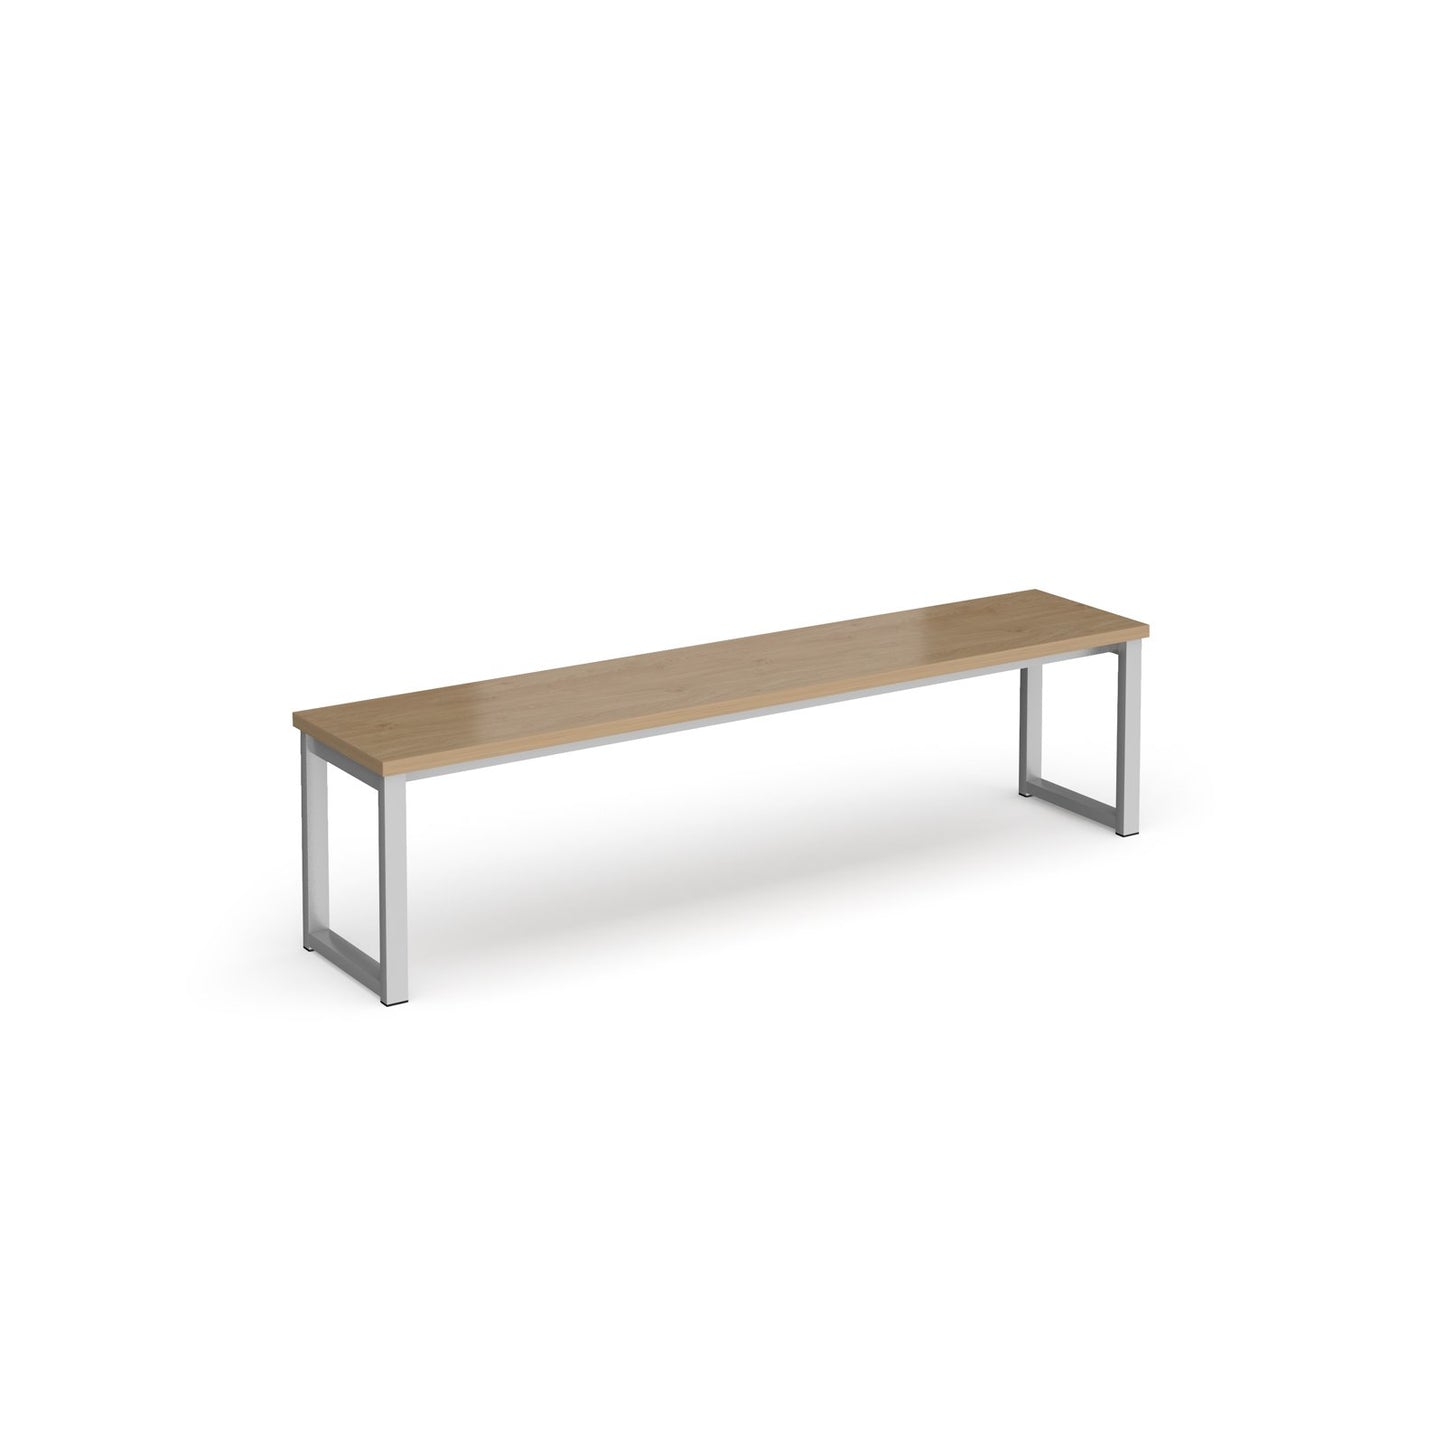 Otto low bench